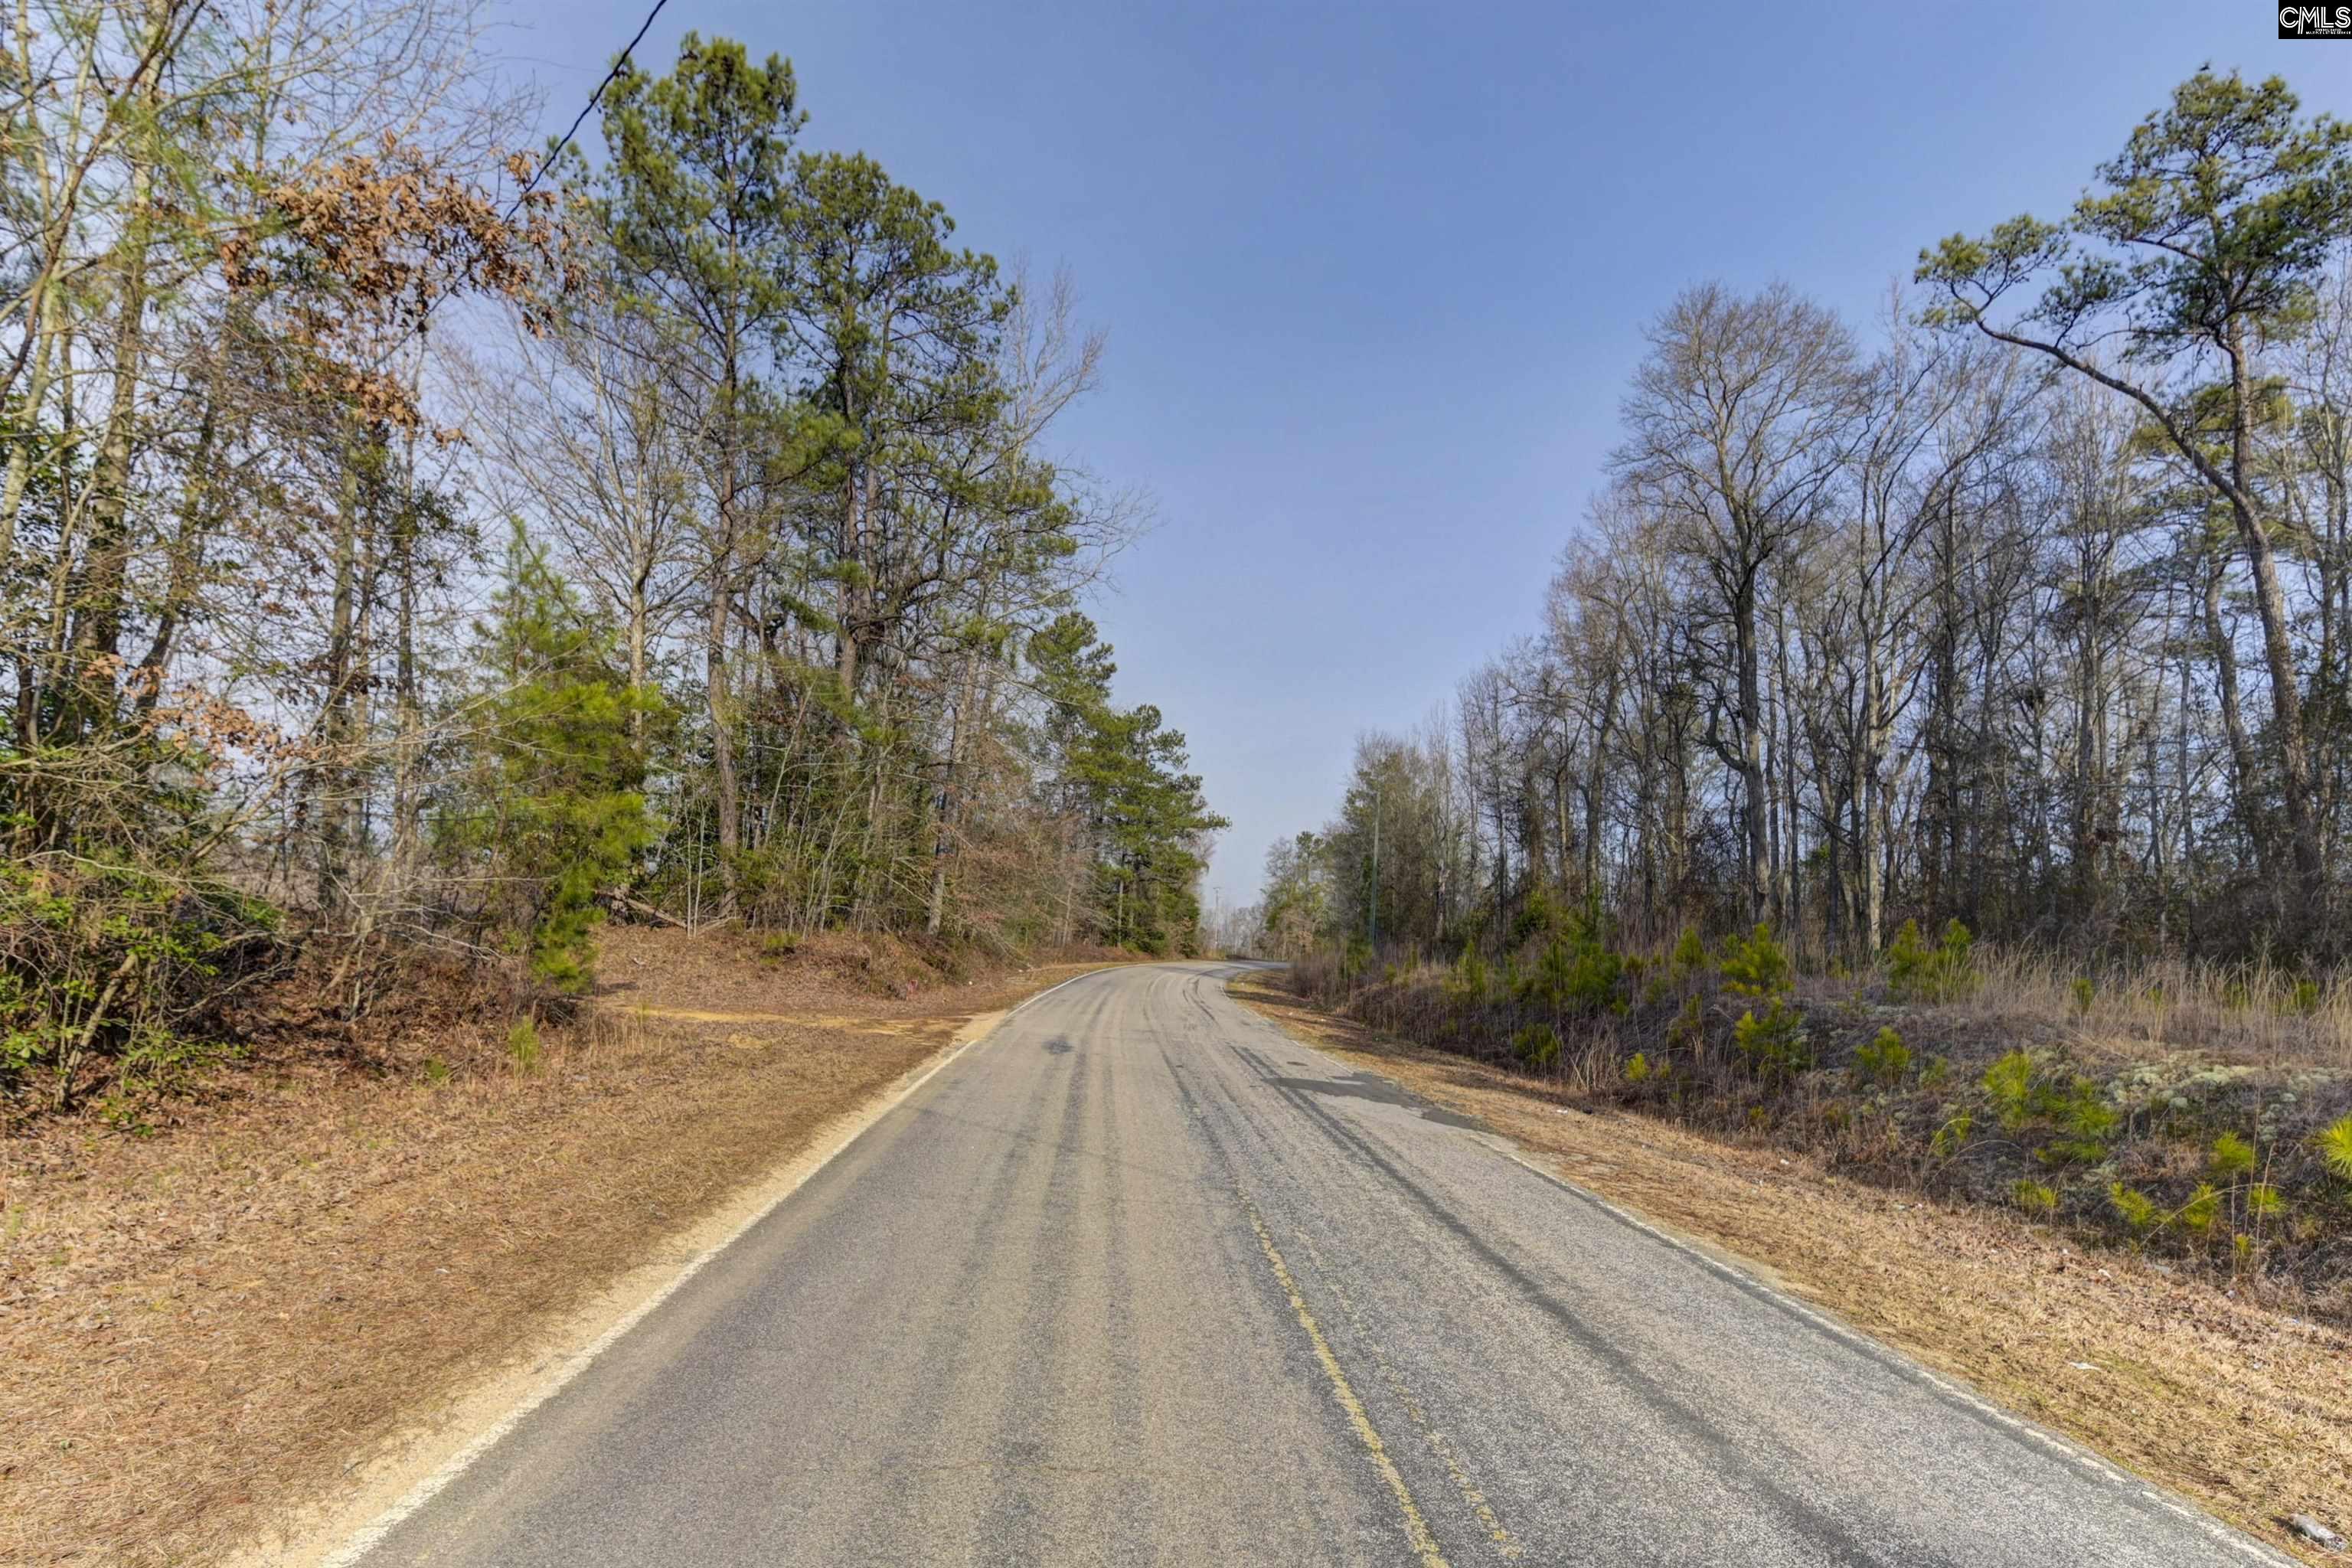  Lots For Sale - 703 Neds Creek, Kershaw, SC - 2 